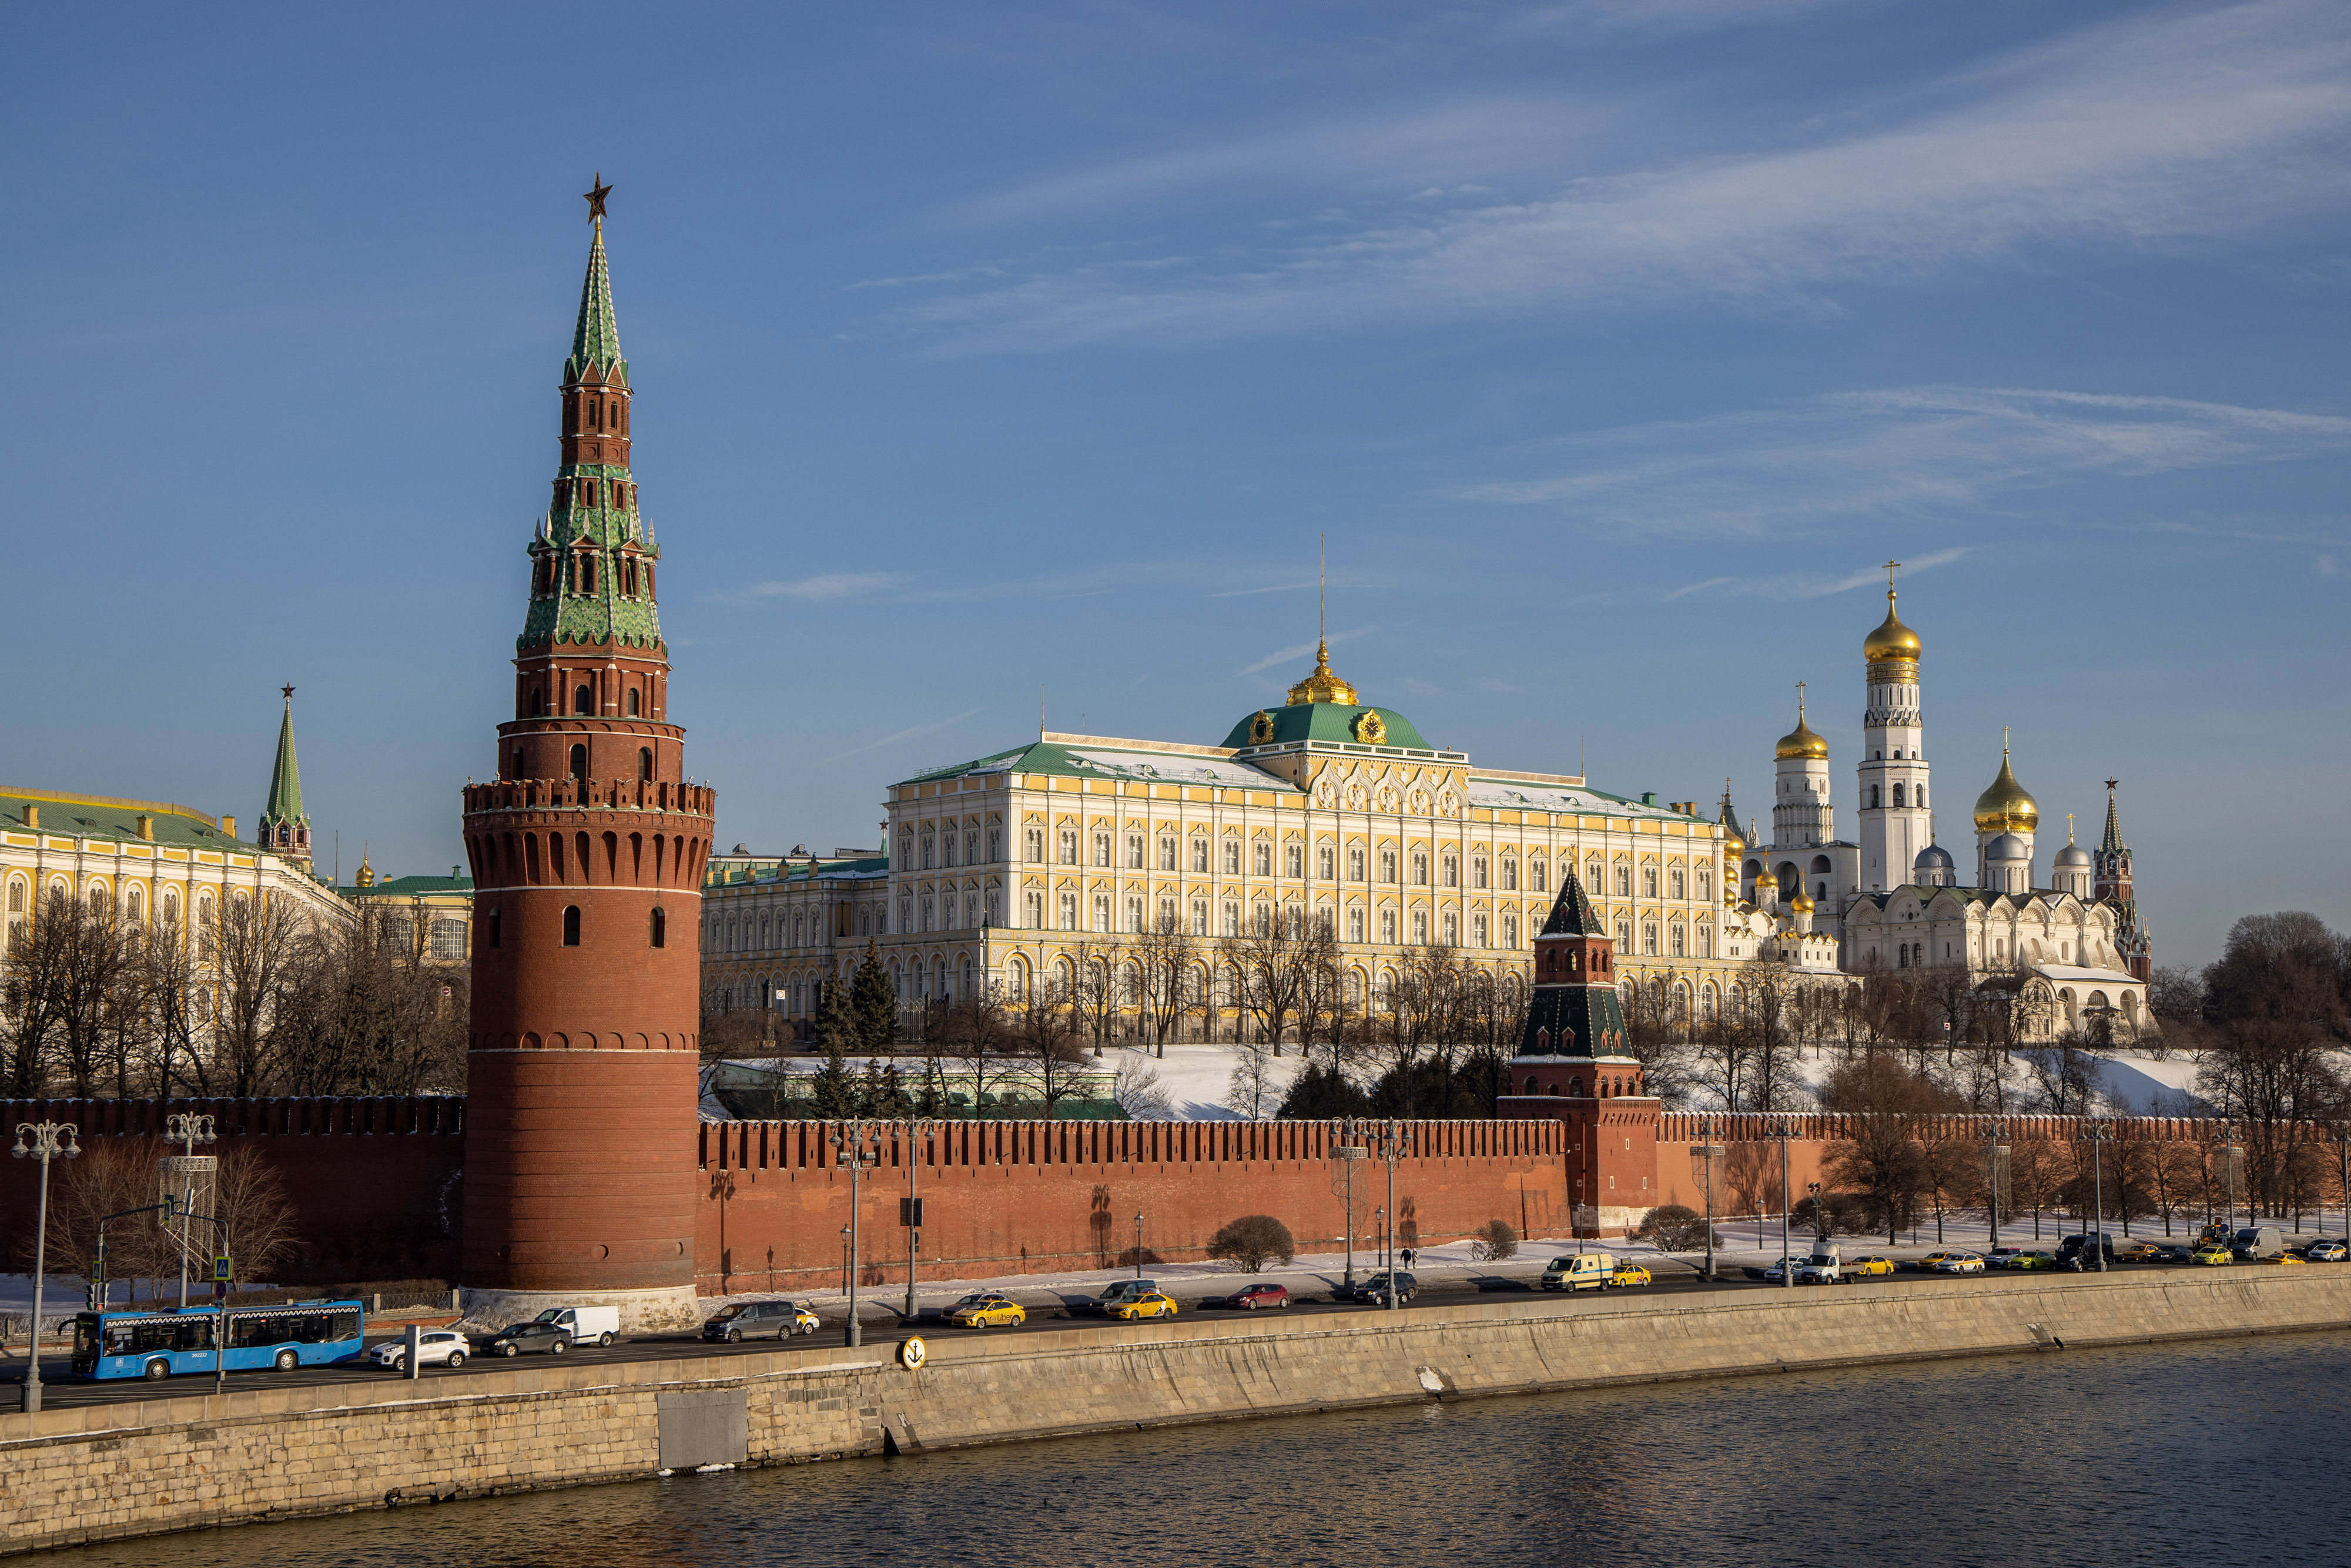 The Grand Kremlin palace, center, and the Cathedral of the Annunciation, right, in Moscow, Russia, on February. 15.